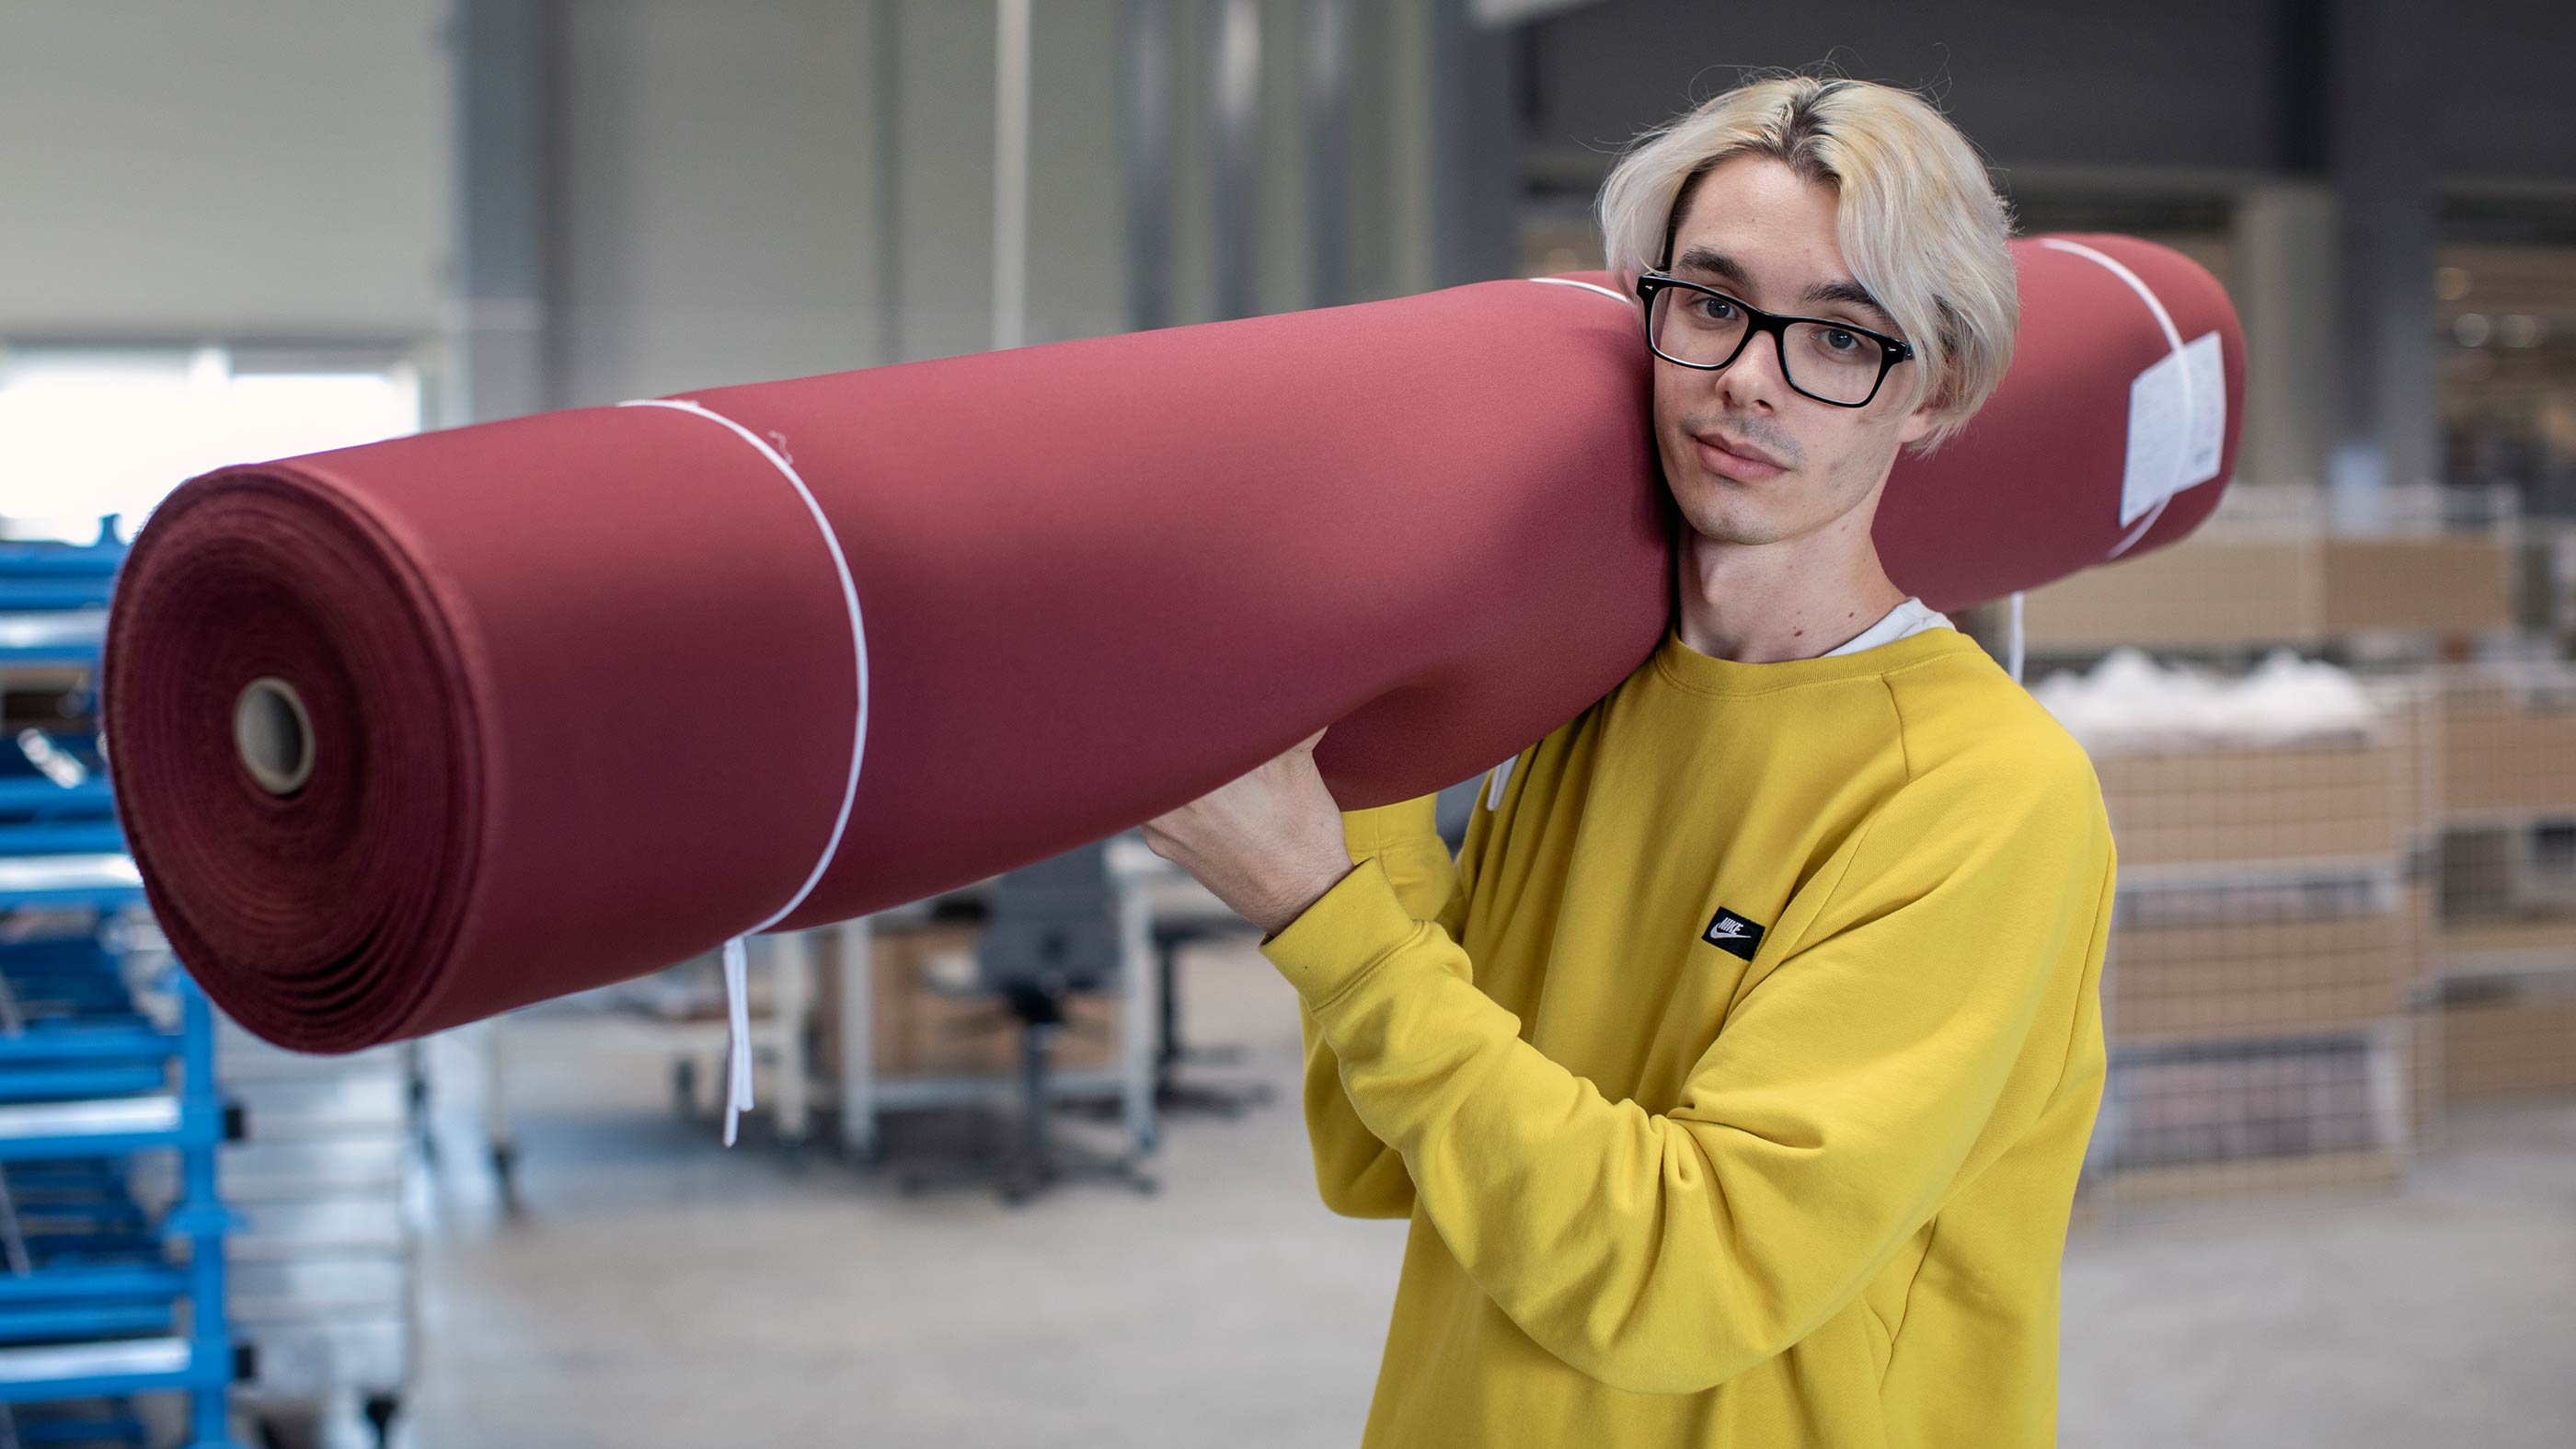 Employee carries a roll of burgundy fabric for further processing | mey®